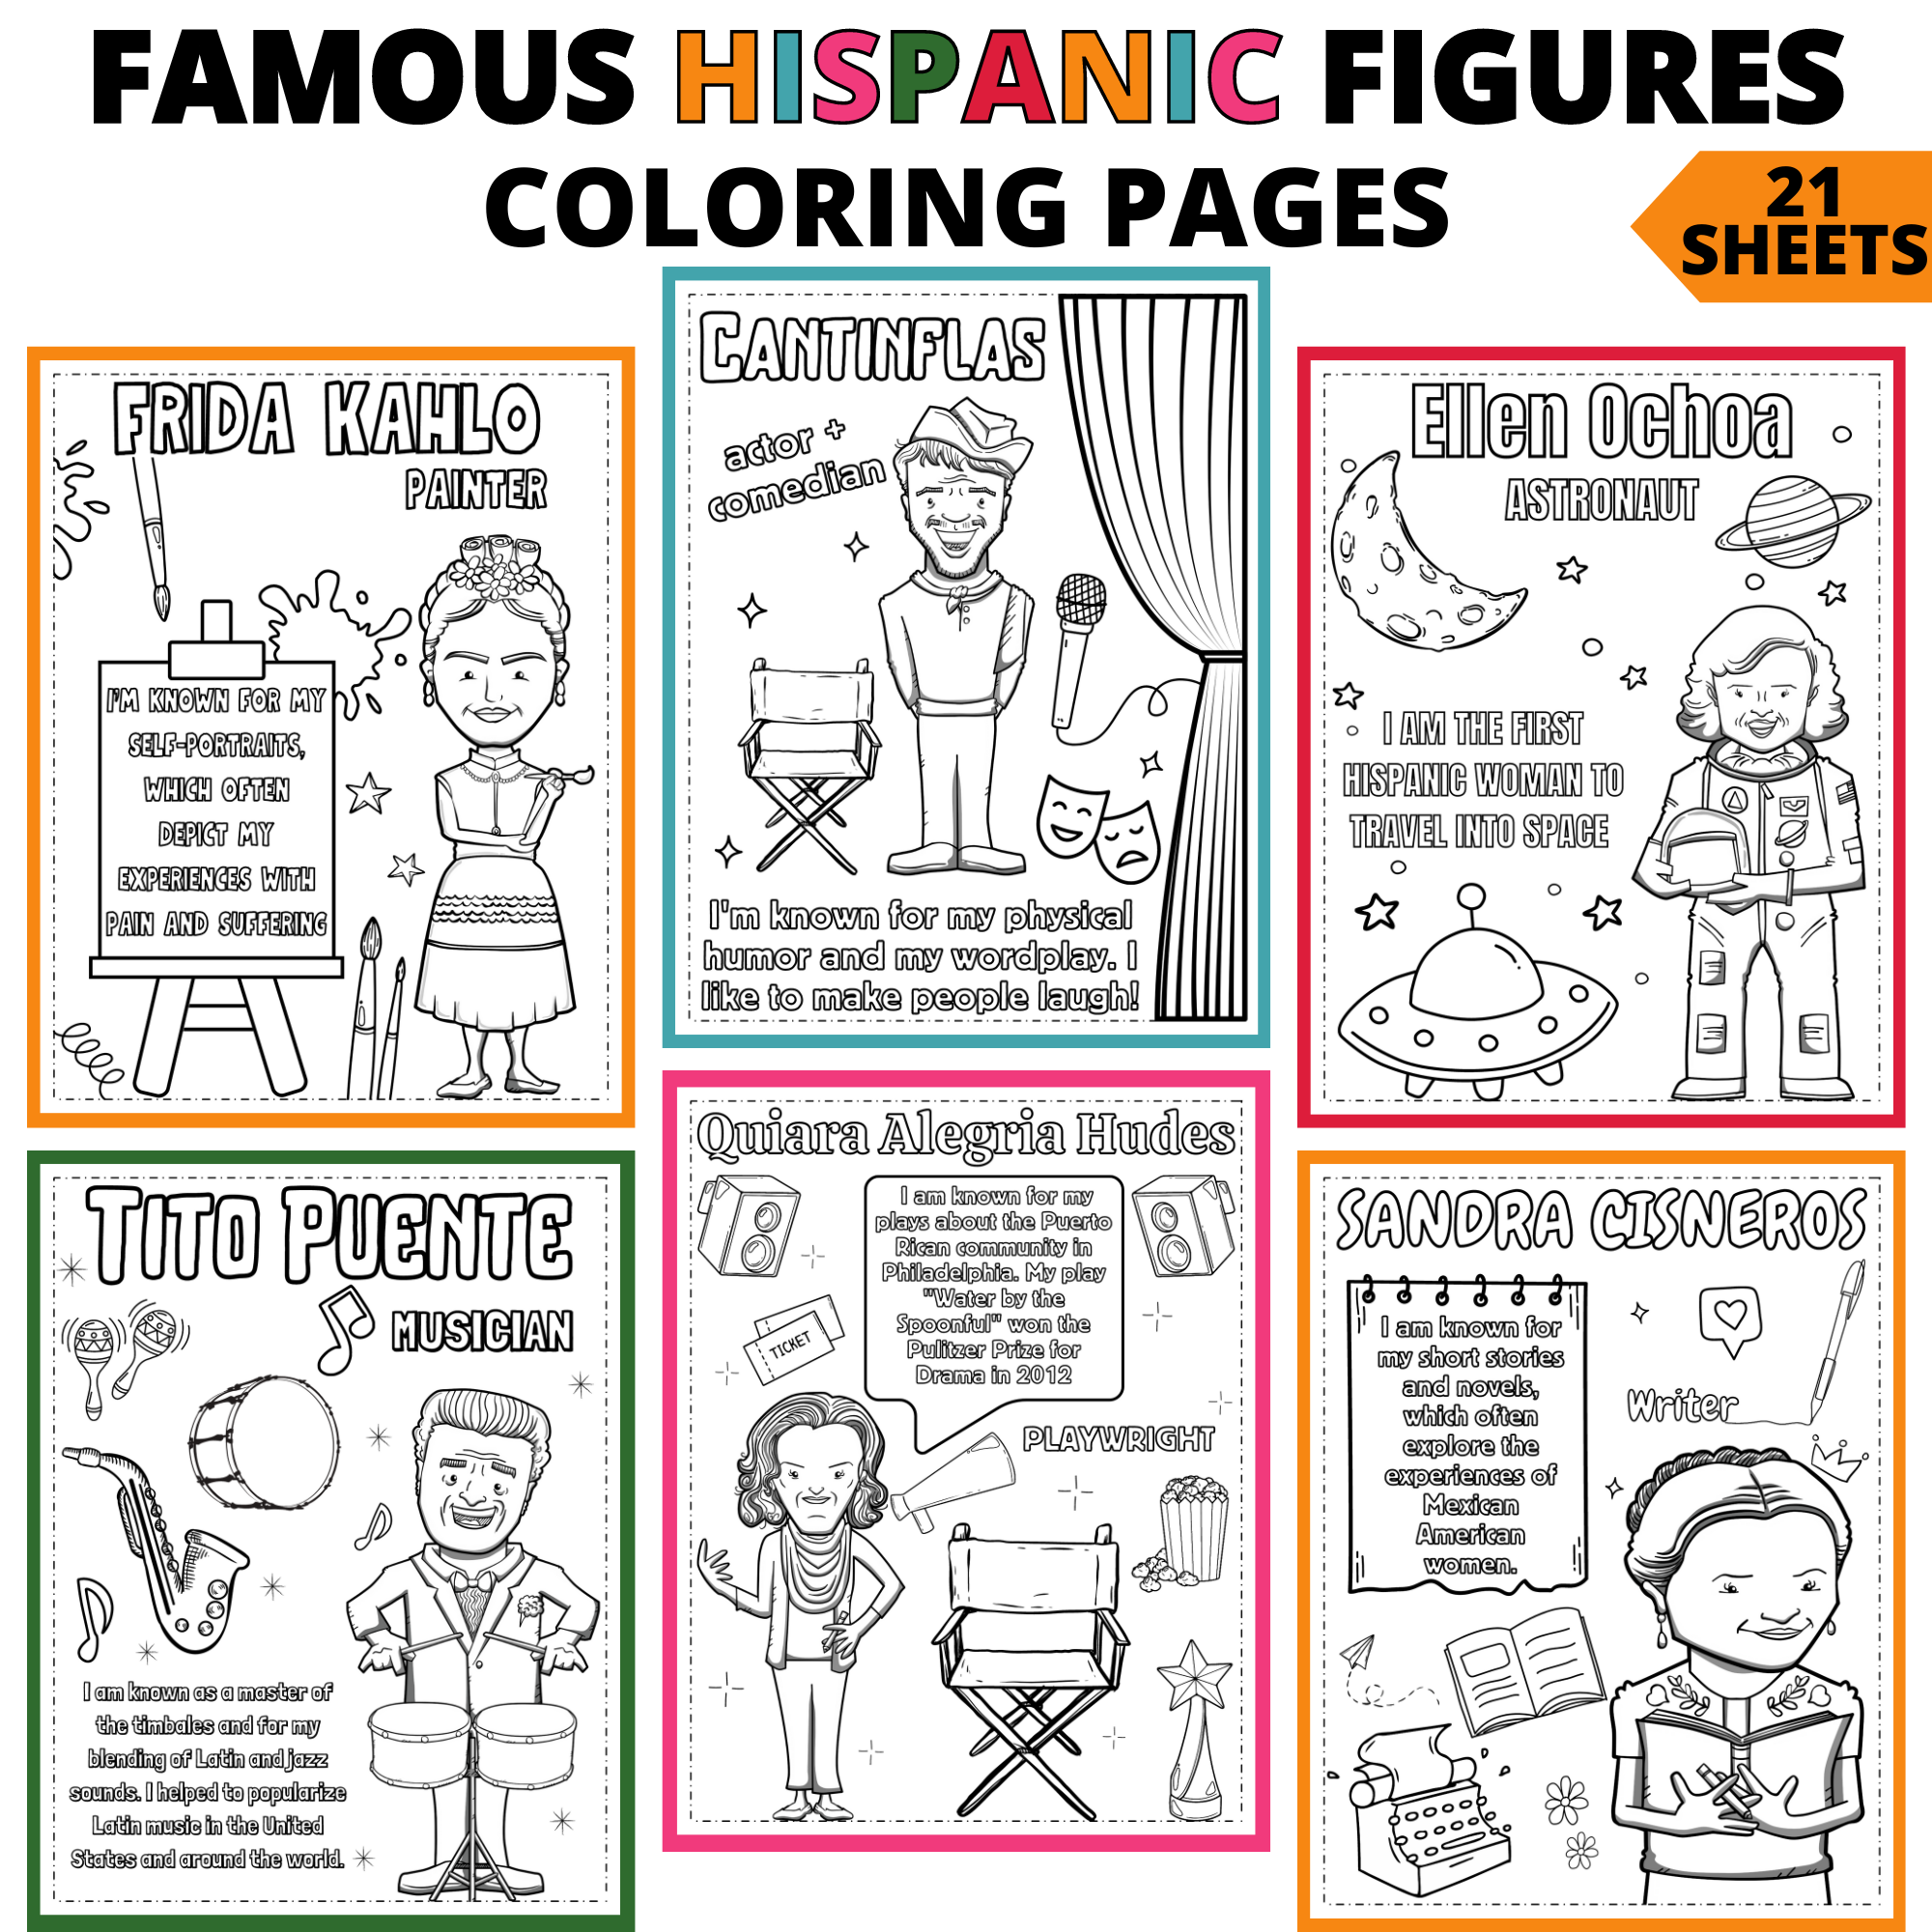 Hispanic heritage month coloring pages famous hispanic figures coloring pages made by teachers